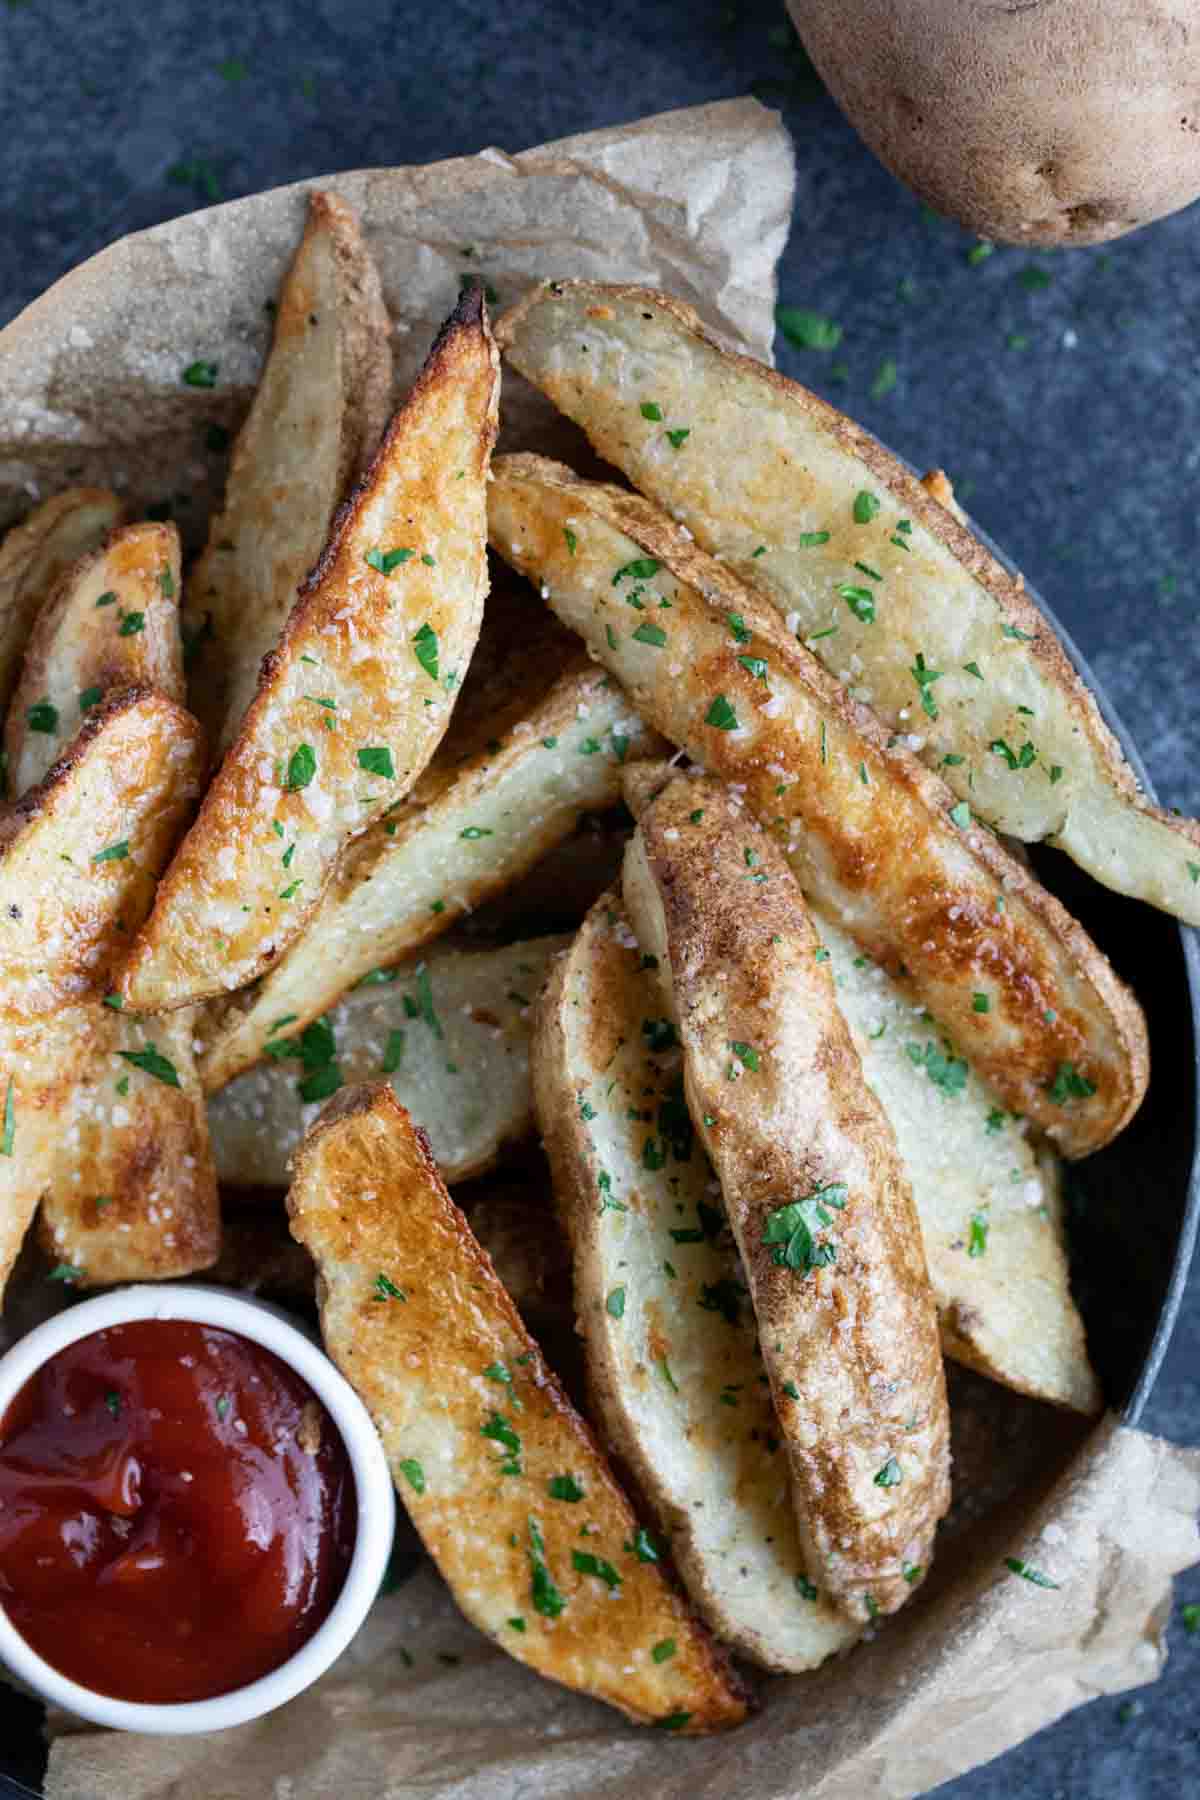 baked potato wedges sprinkled with salt and parsley.